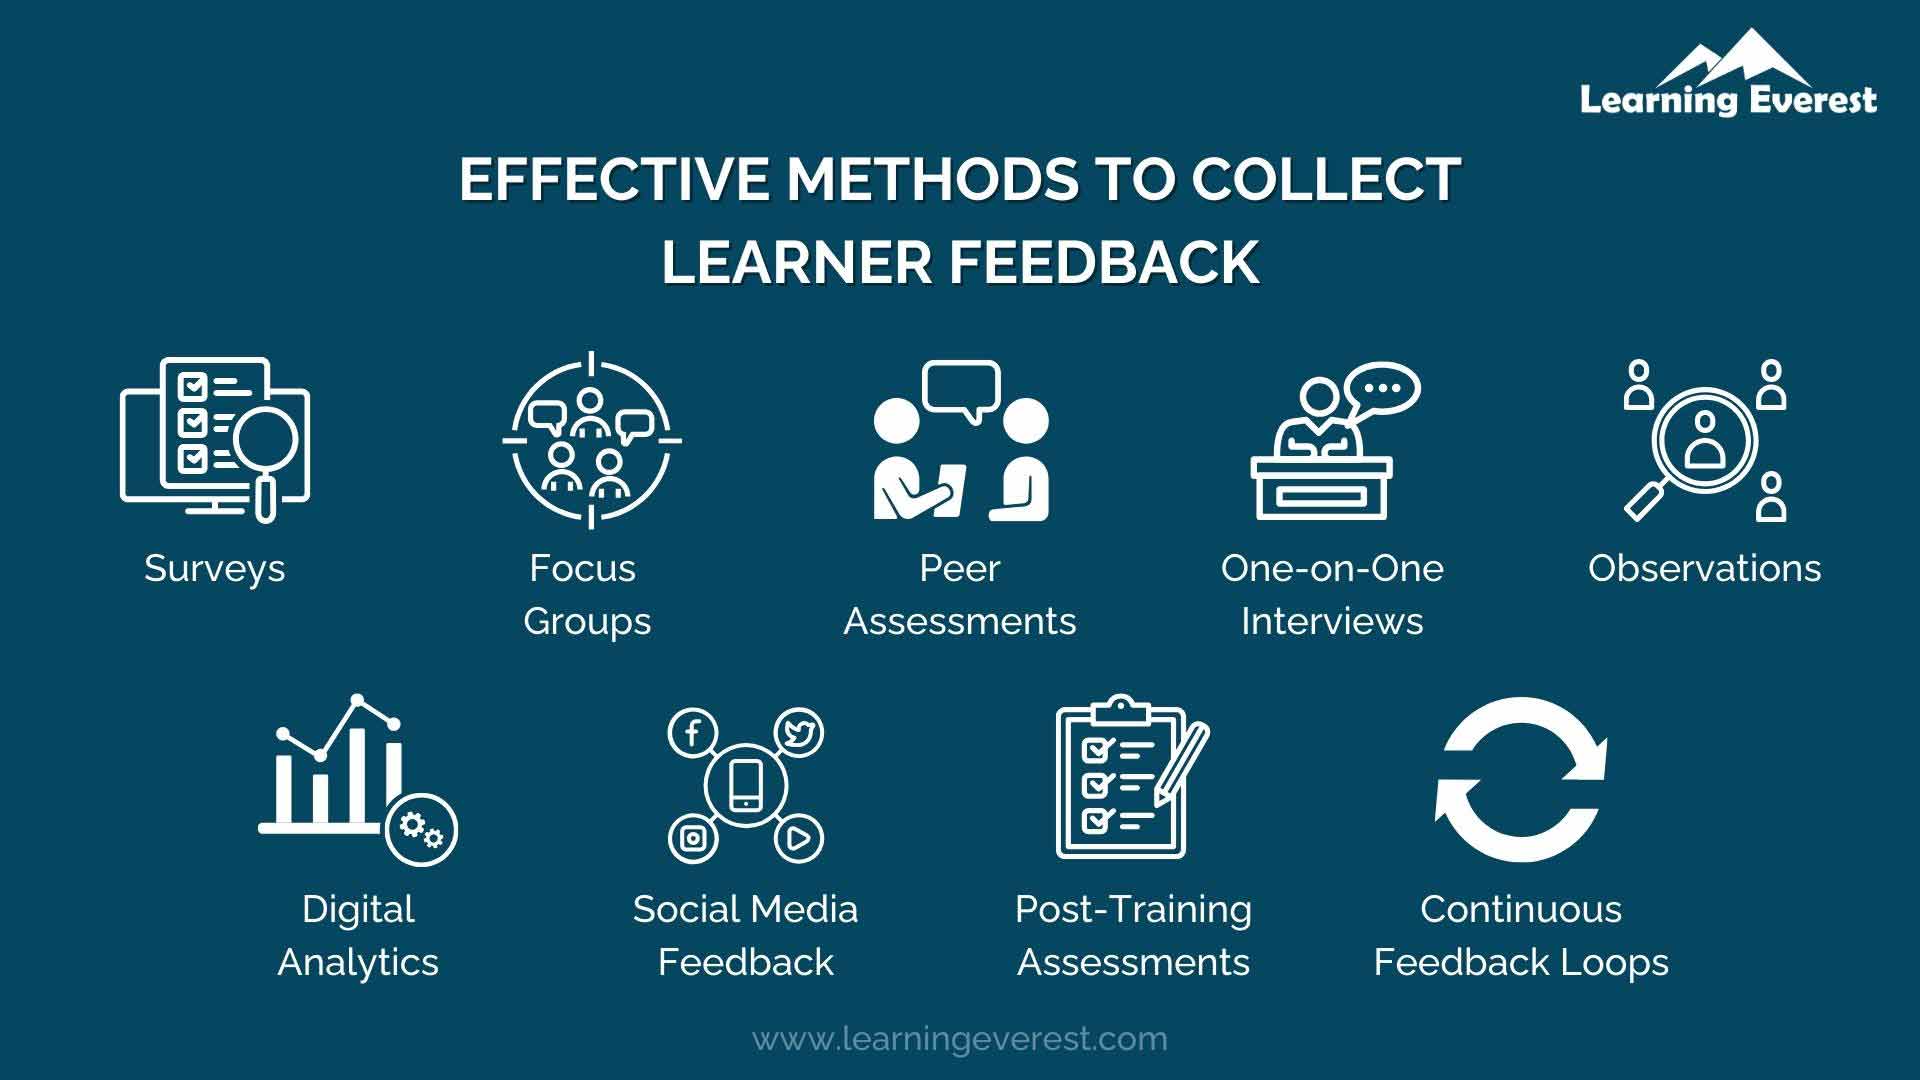 Effective Methods to Collect Learner Feedback